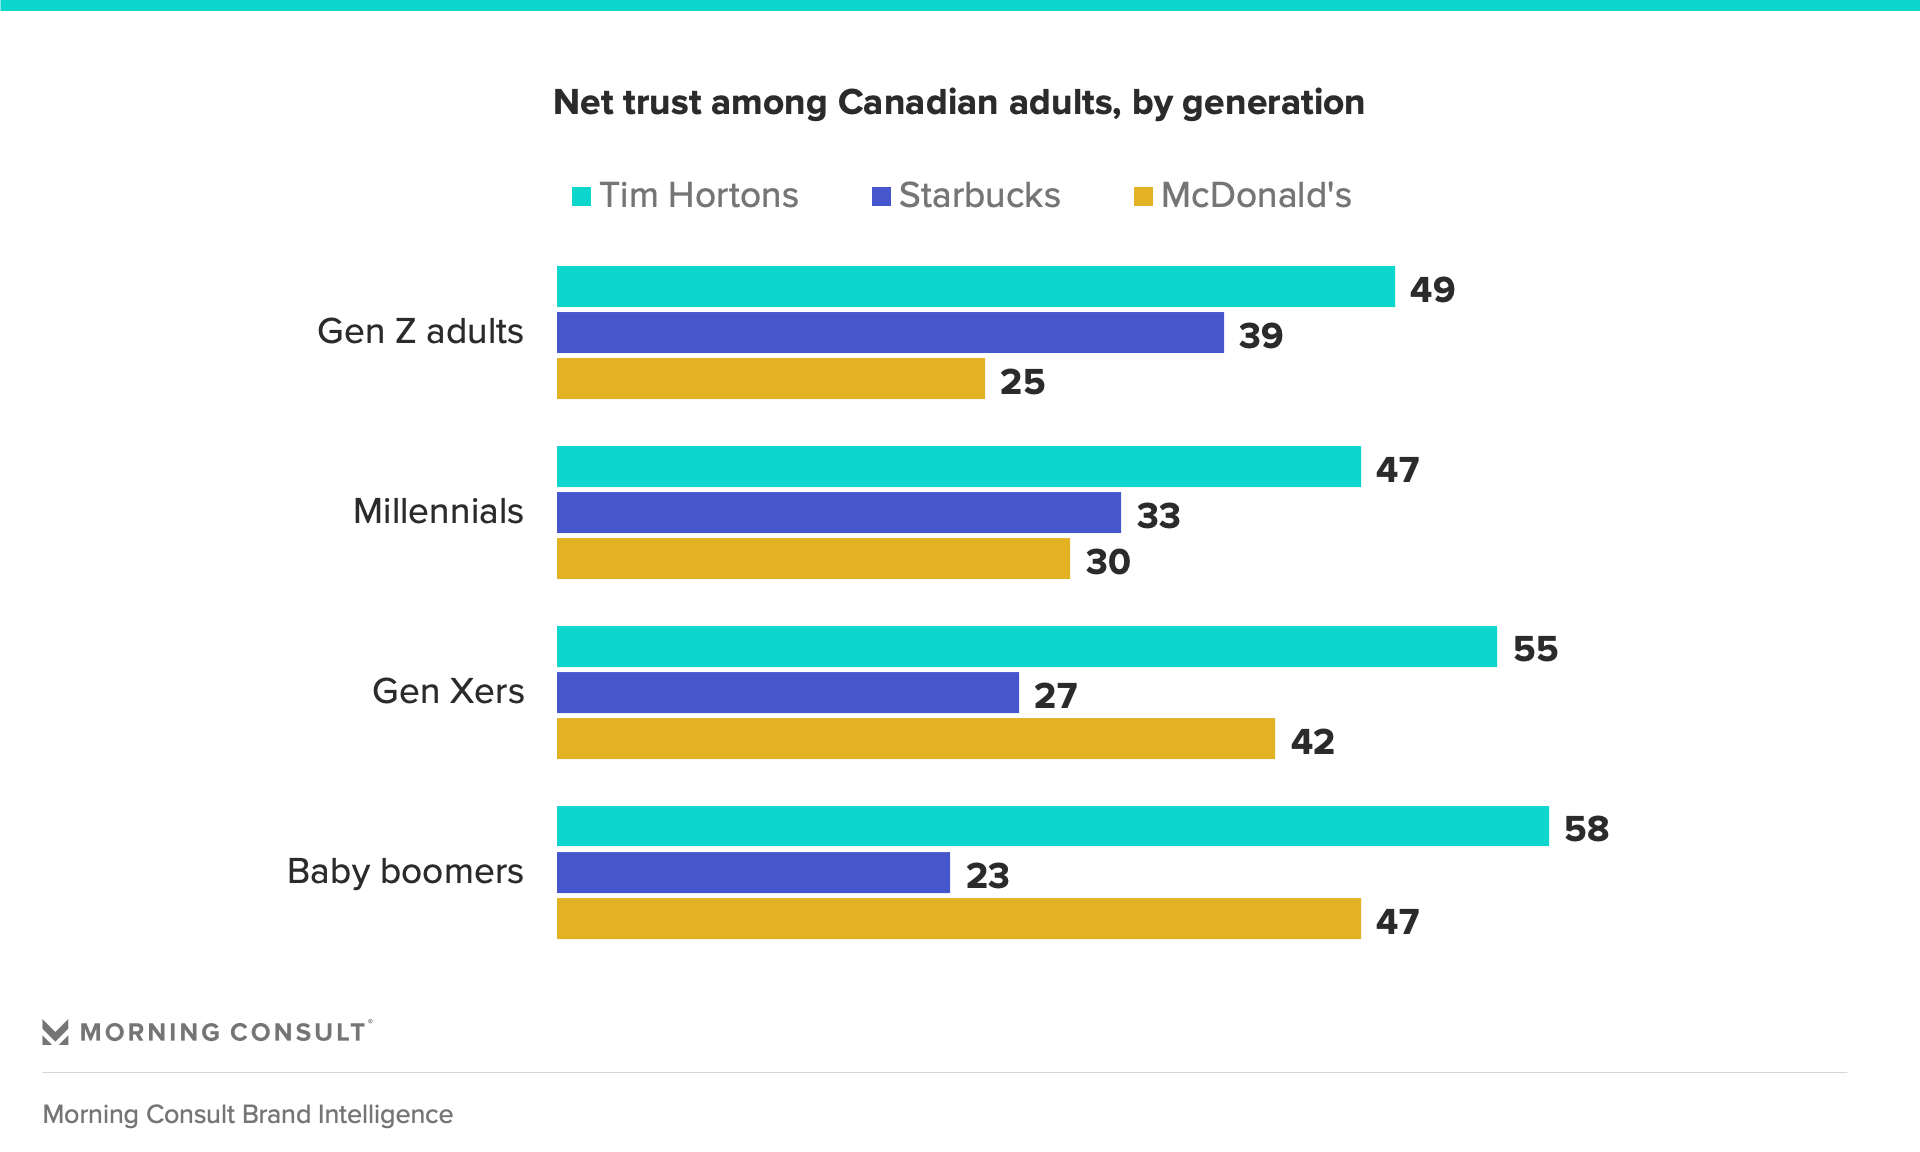 Bar charts showing Canadian net trust in Tim Hortons, Starbucks and McDonald's by generation